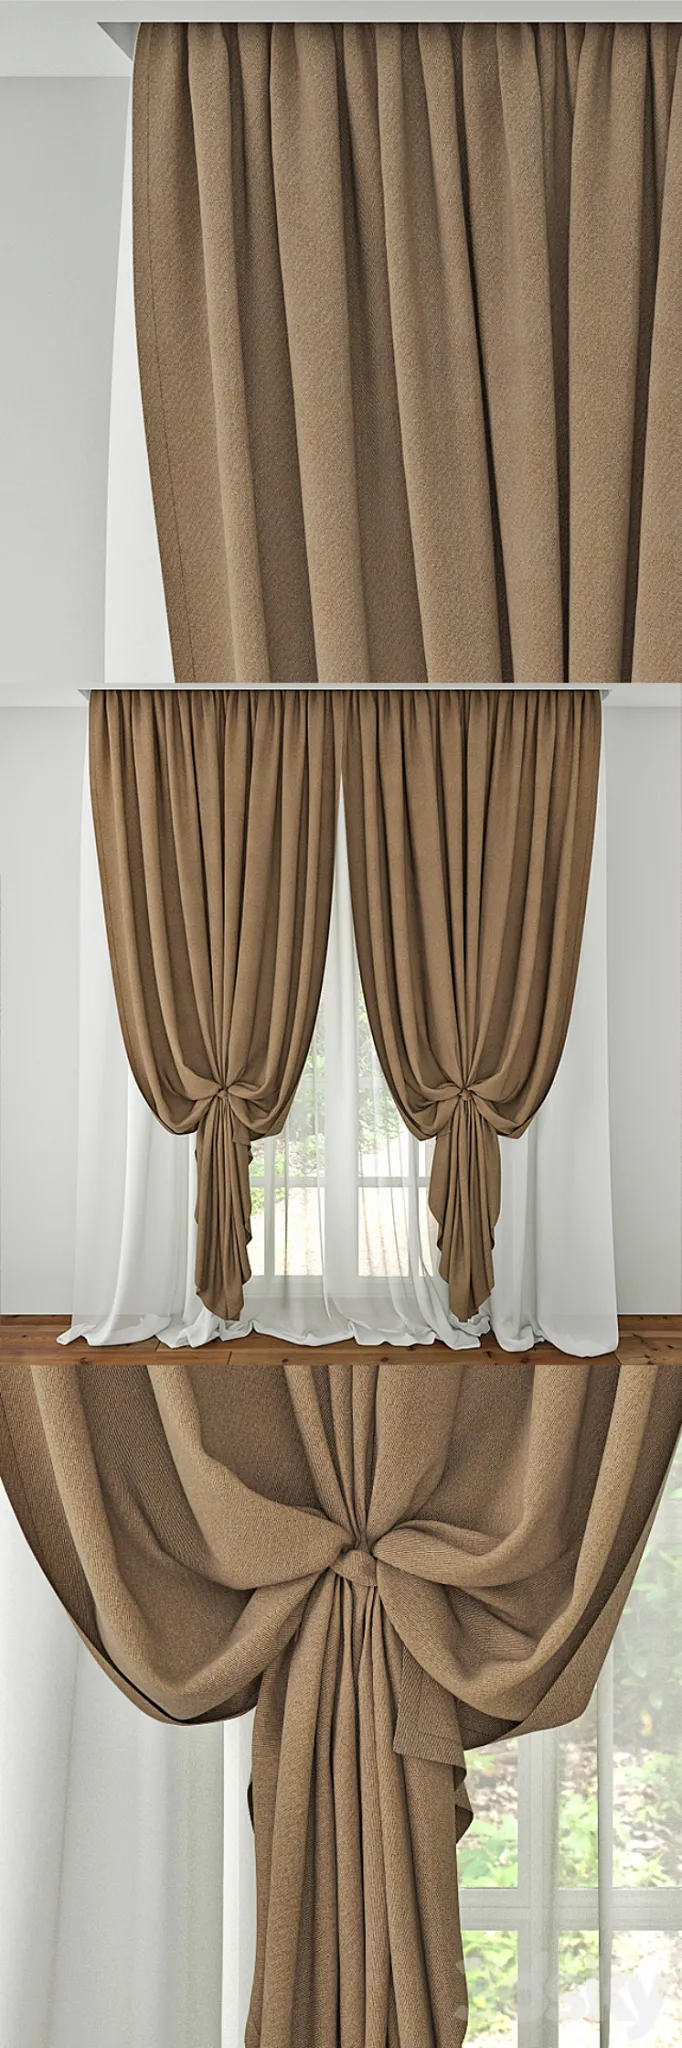 Curtain 6 3DS Max